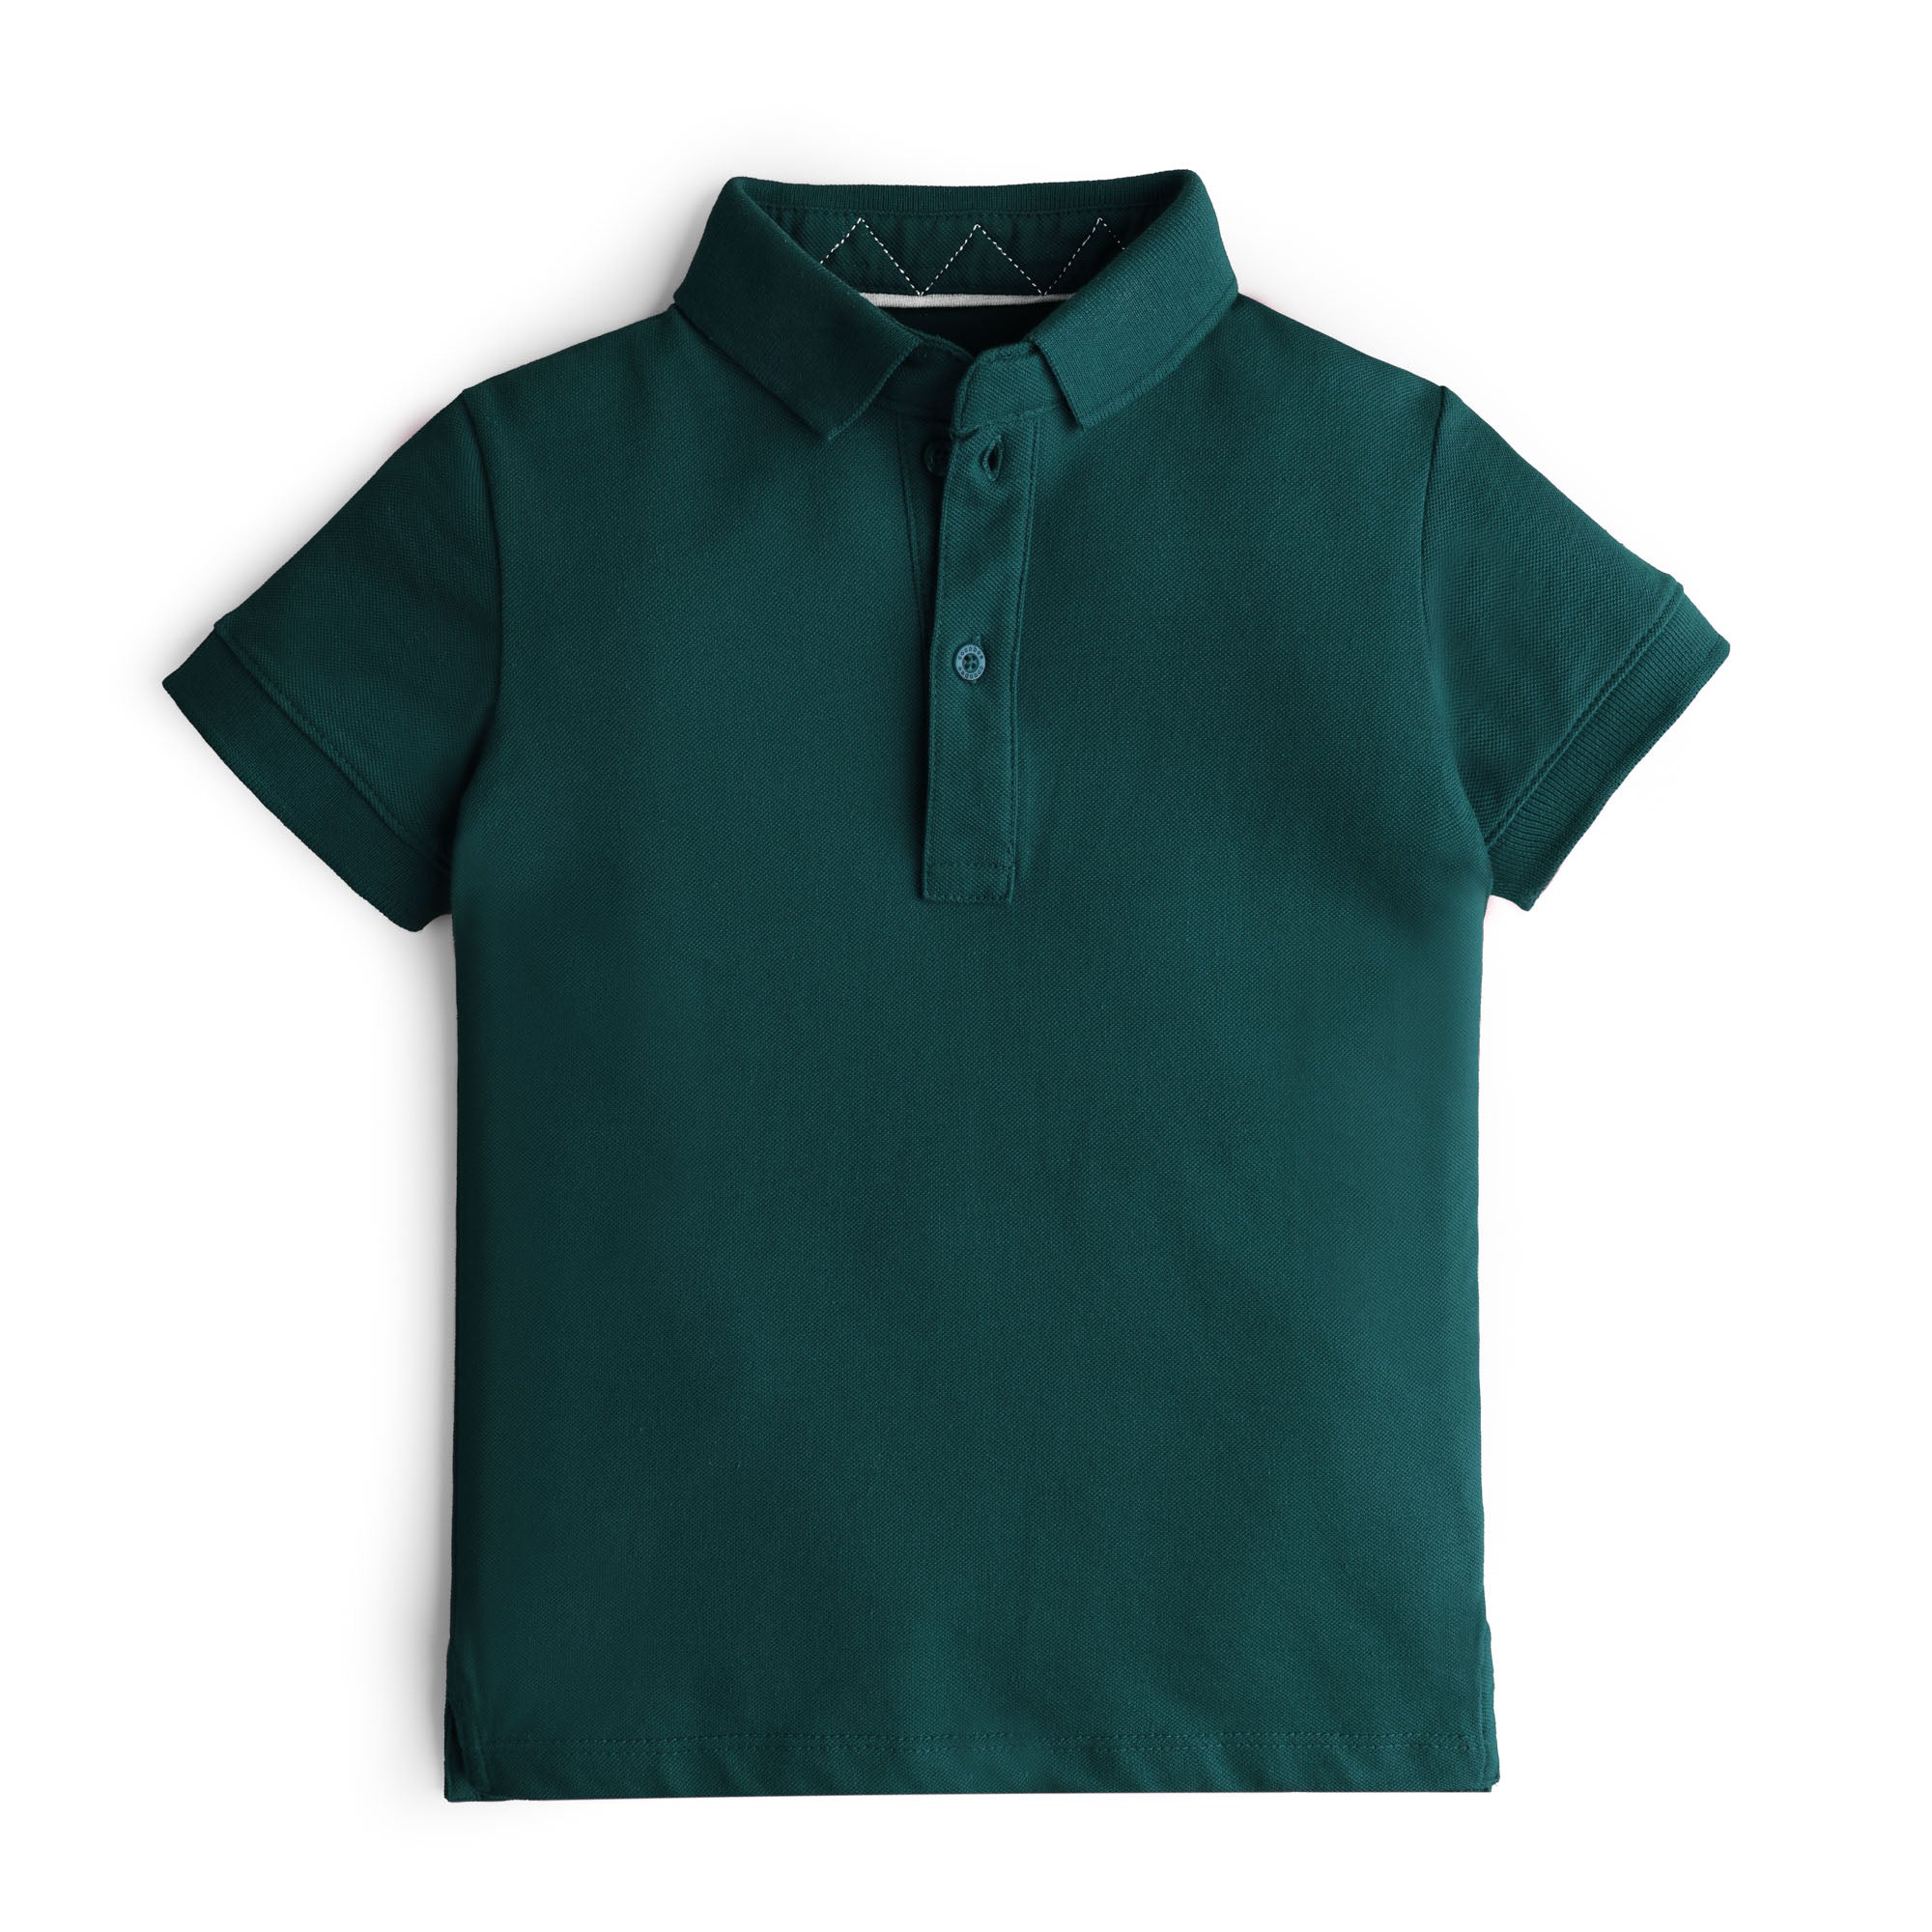 Solid Green Polo